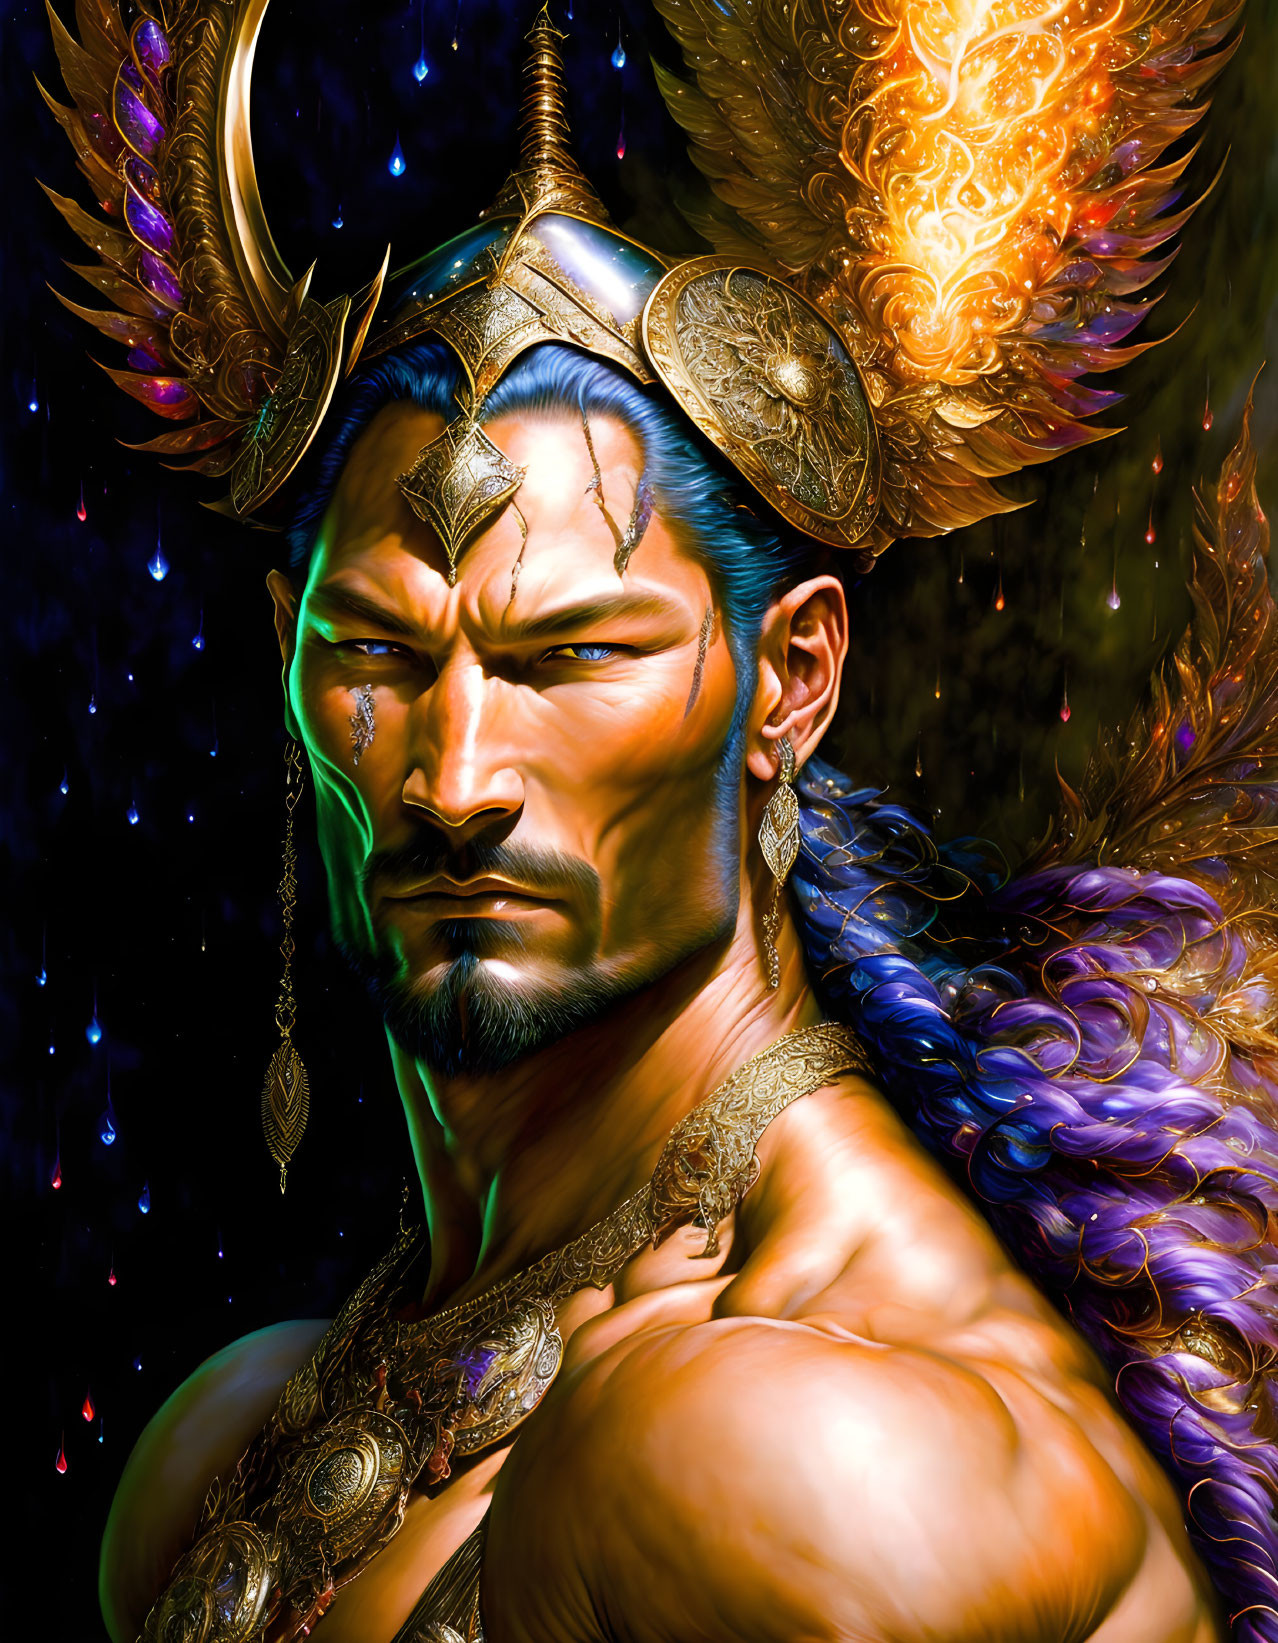 Fantasy figure with elaborate headgear and glowing wings in vibrant digital artwork